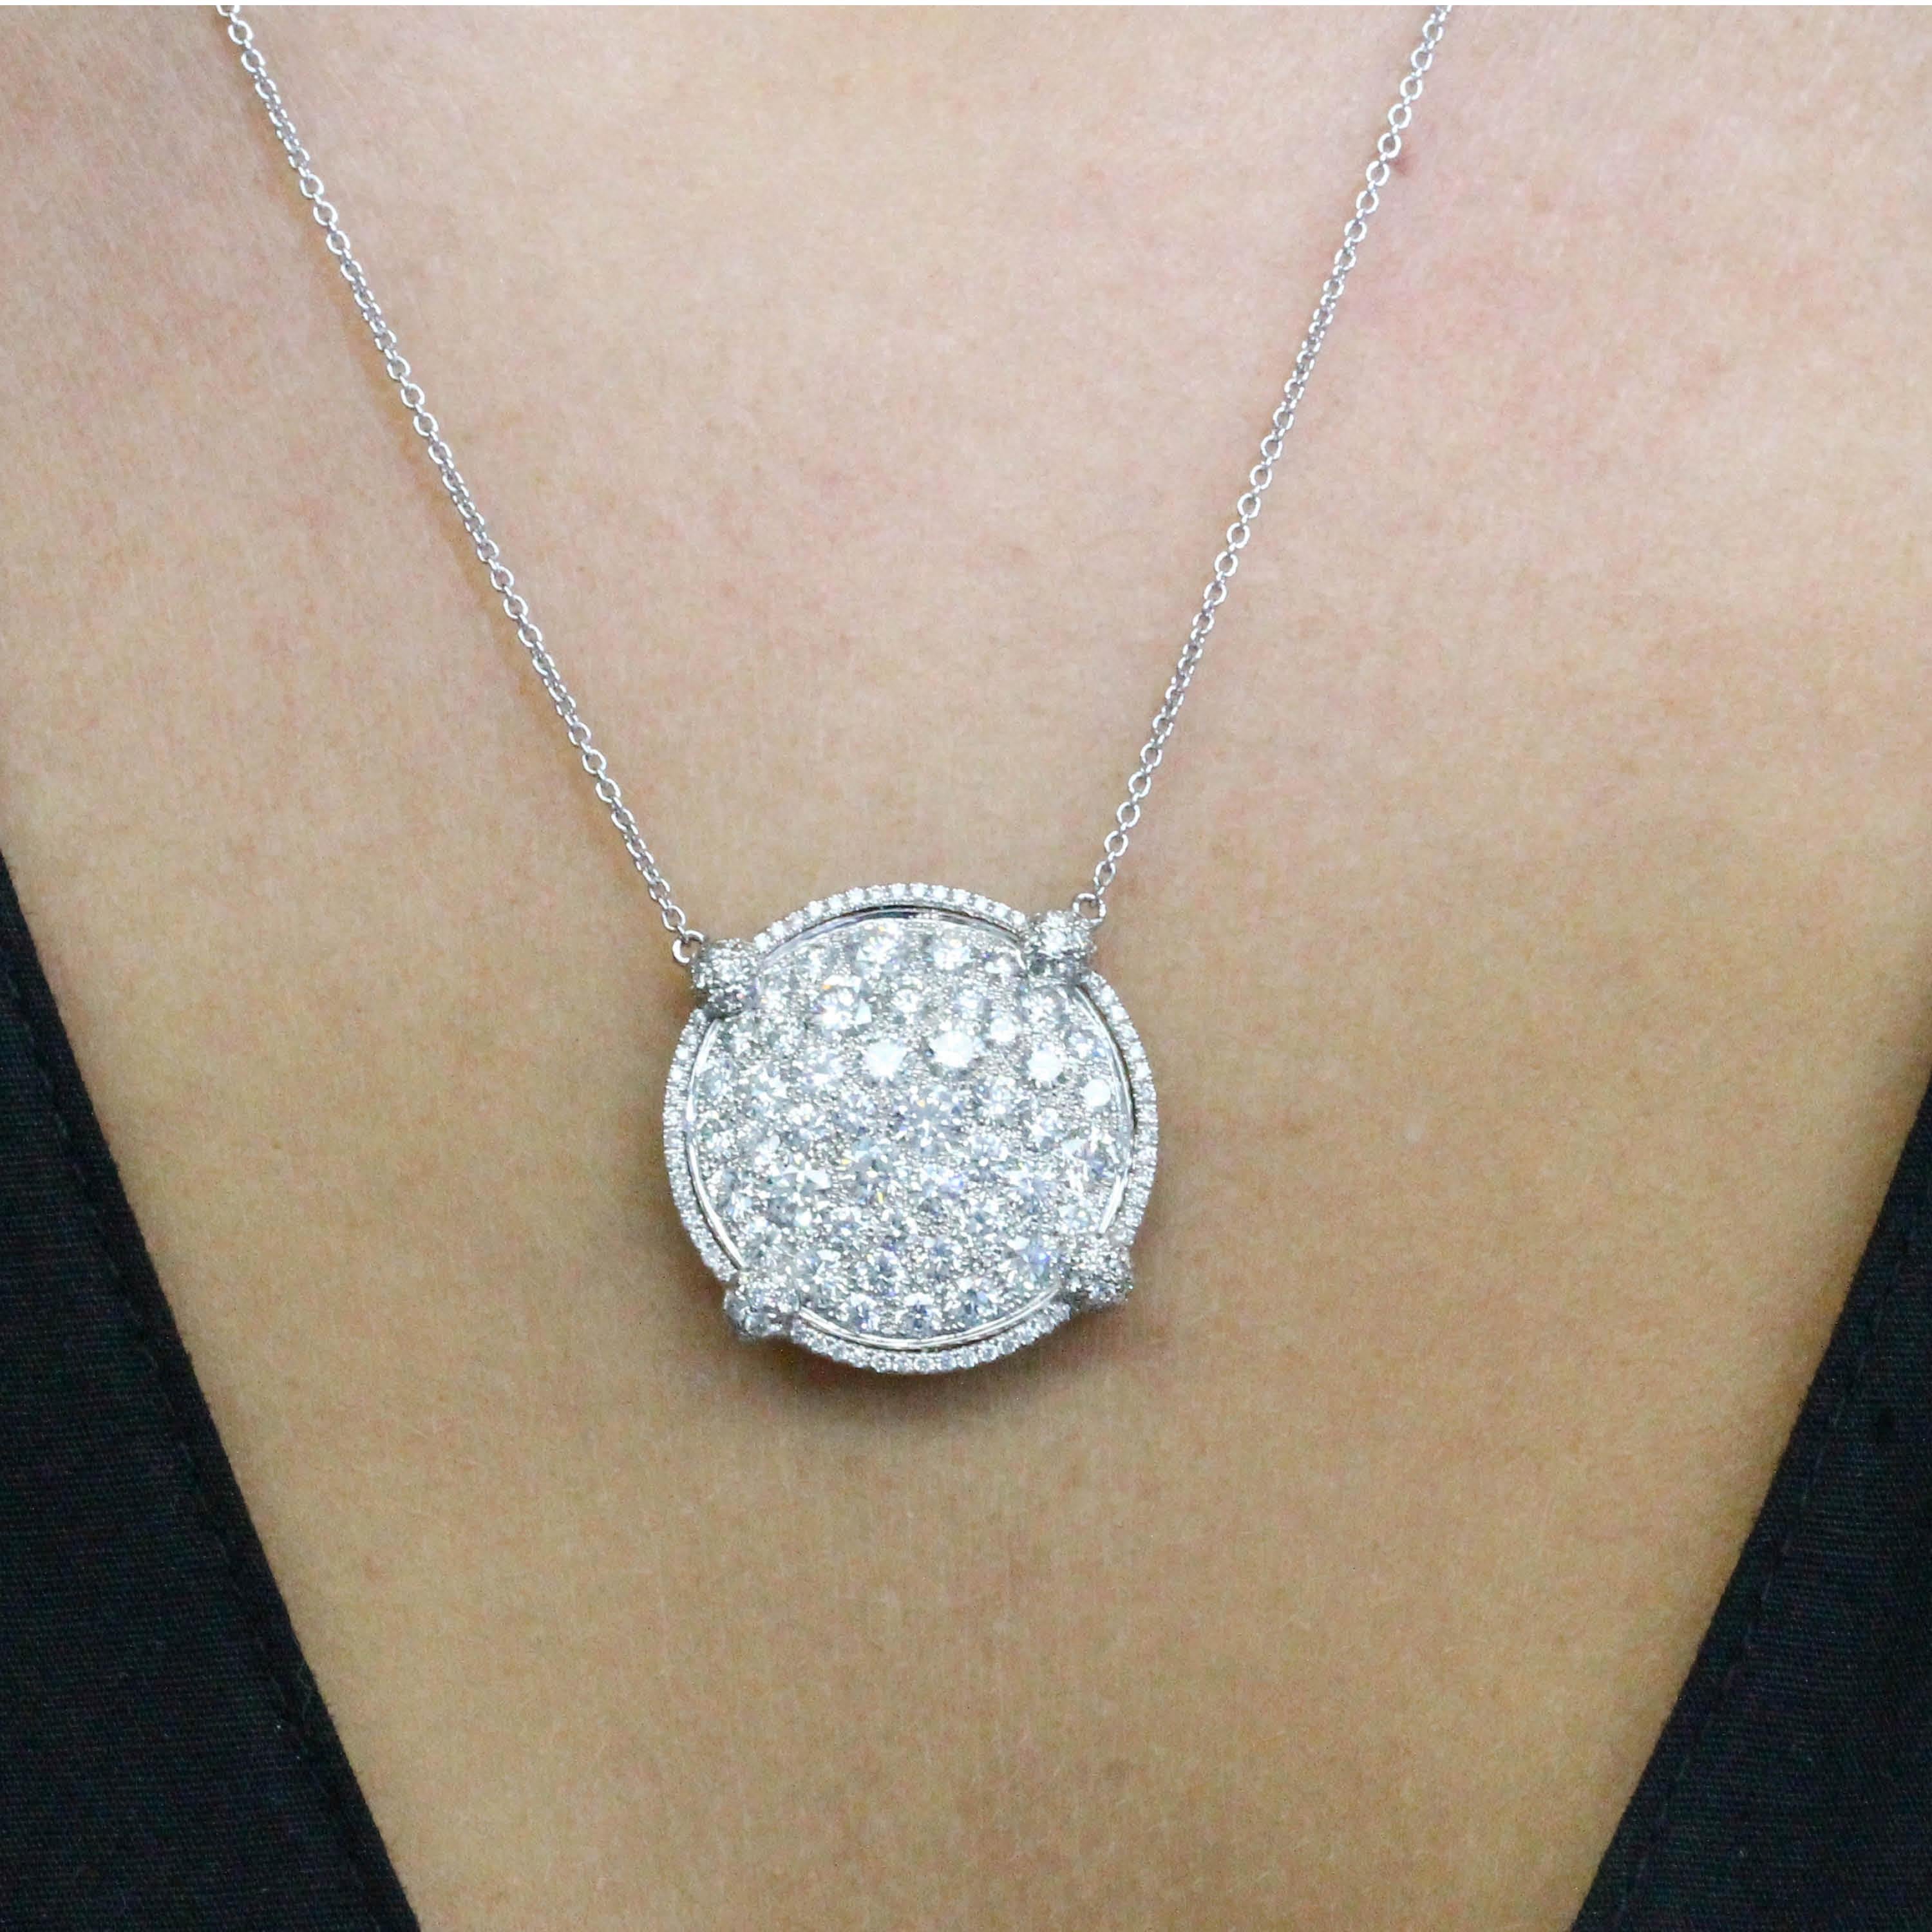 A Stunning One-of-a-Kind Necklace featuring 3.26 Carats of White Diamonds, Pavé Set, hanging from an 18